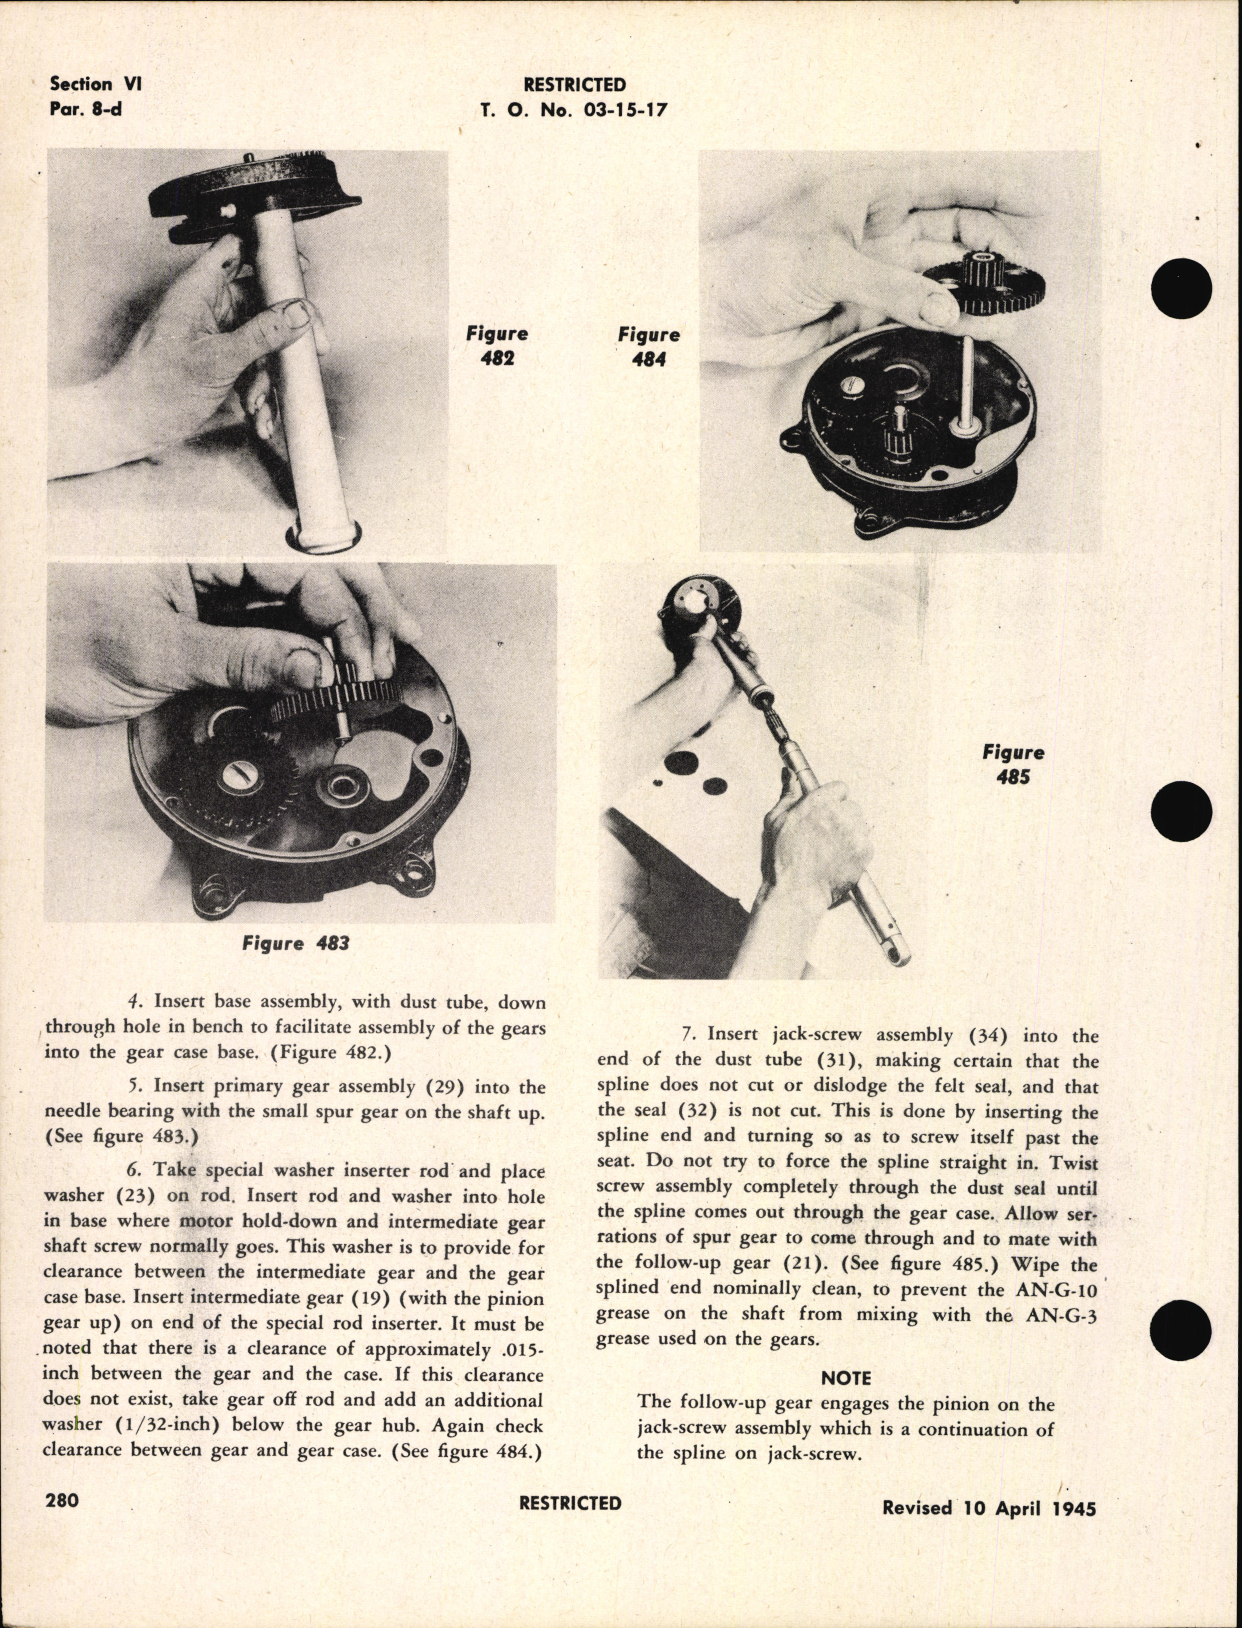 Sample page 8 from AirCorps Library document: Handbook of Instructions with Parts Catalog for Oil Temperature Regulators